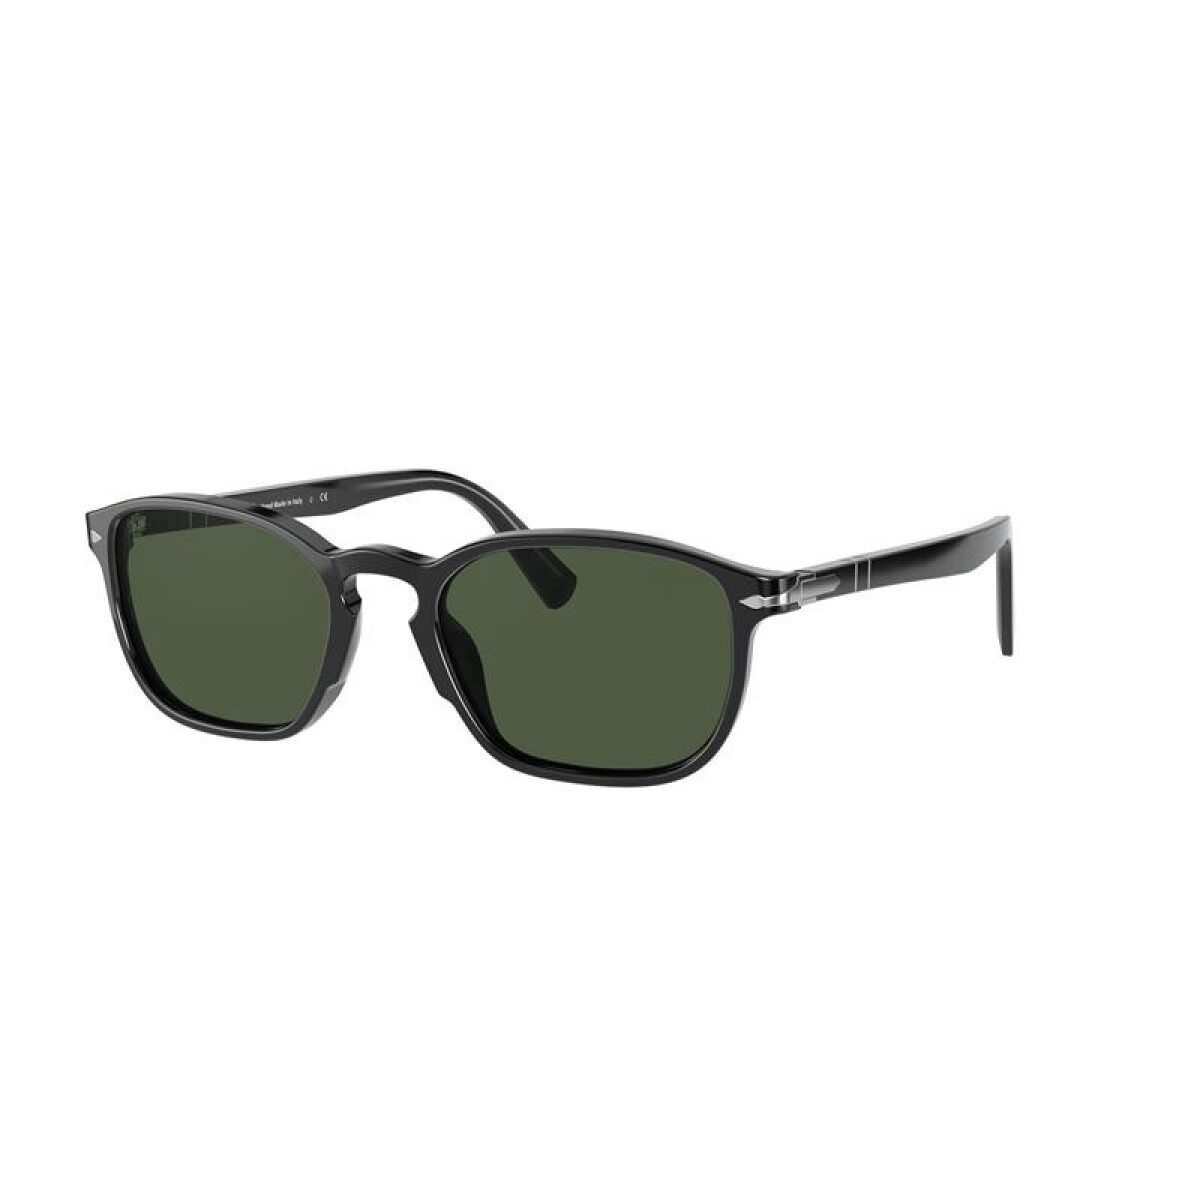 Persol 3234-s - 95/31 